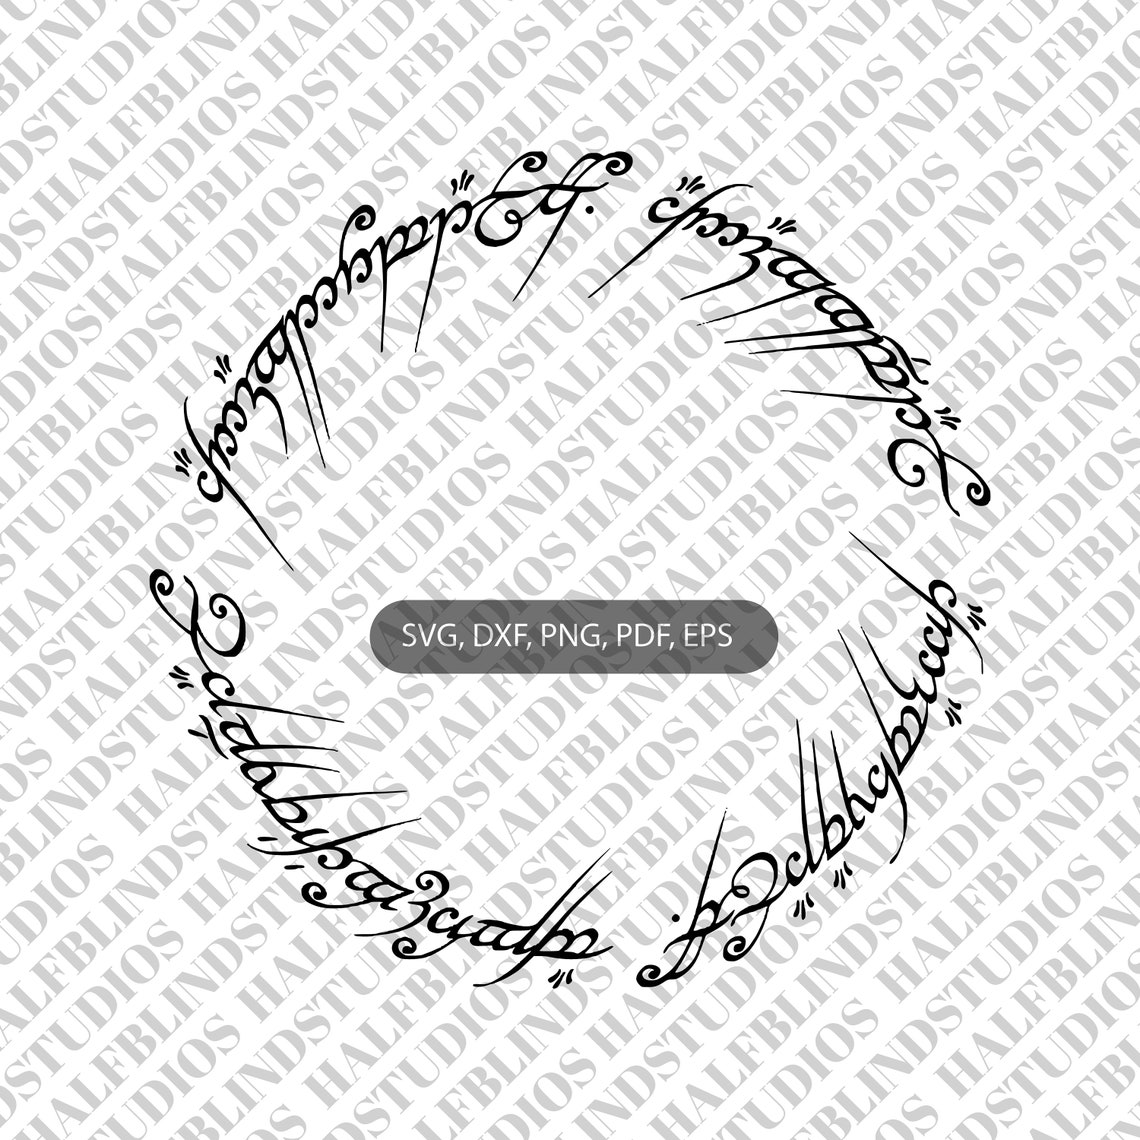 Lord of the Rings inscription svg dxf png digital download | Etsy